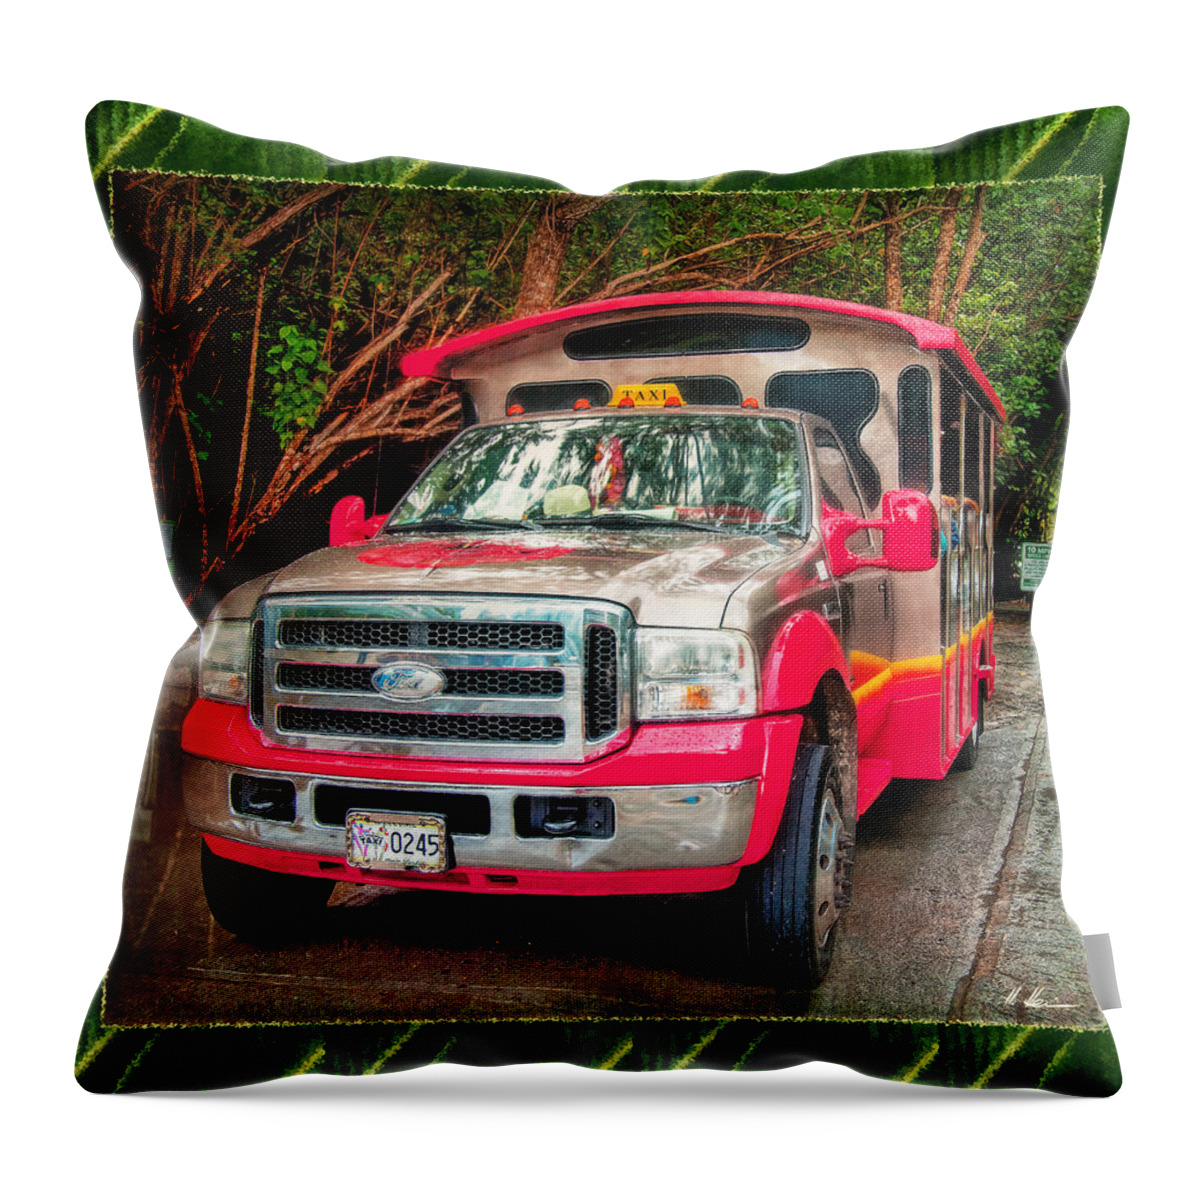 Taxi Throw Pillow featuring the photograph Tropical Taxi by Hanny Heim